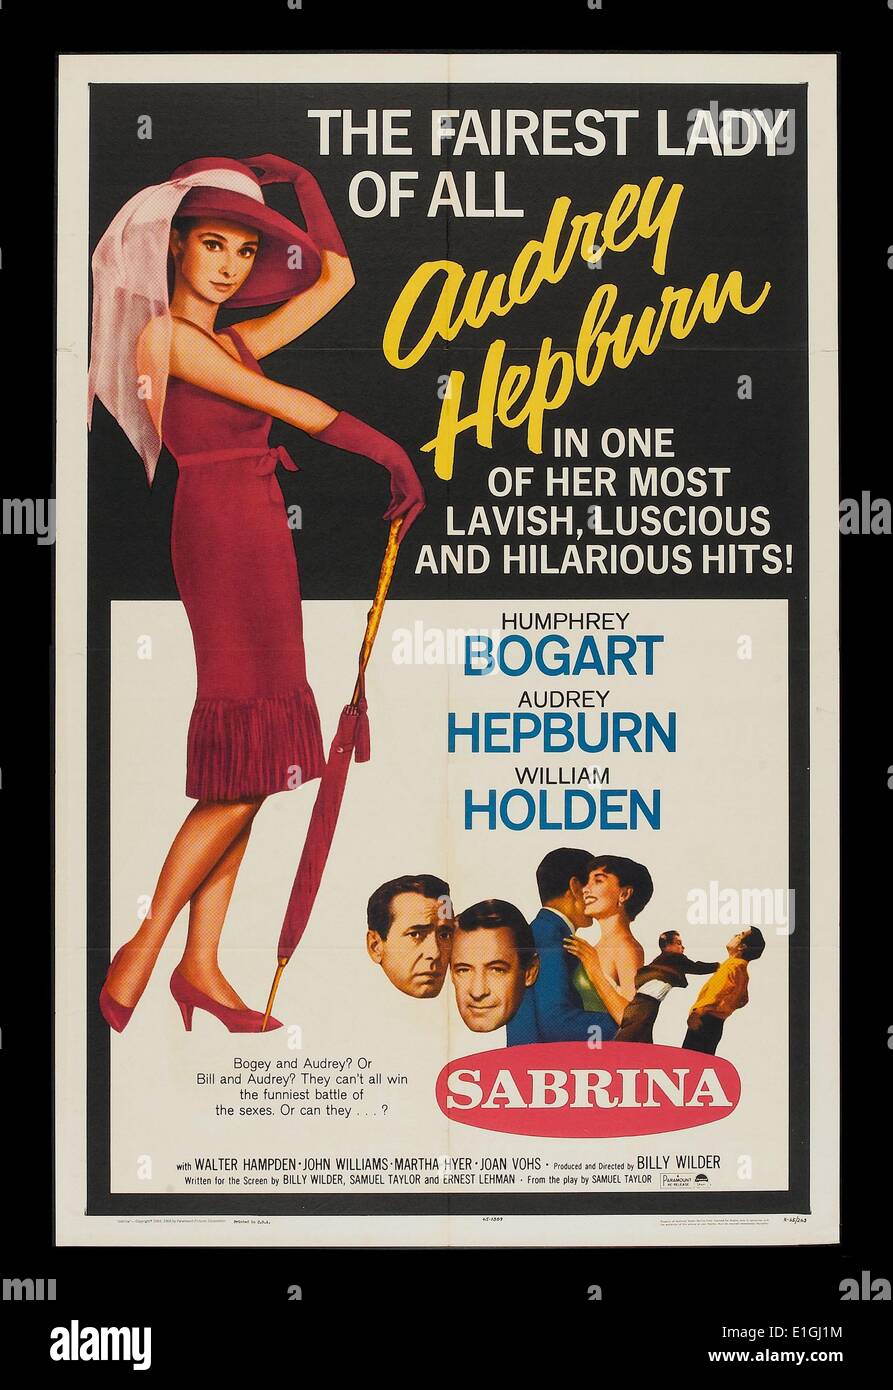 Sabrina (Sabrina Fair in the United Kingdom) is a 1954 American romantic comedy film directed by Billy Wilder, adapted for the screen by Wilder, Samuel A. Taylor, and Ernest Lehman from Taylor's play Sabrina Fair. It stars Humphrey Bogart, Audrey Hepburn, and William Holden Stock Photo